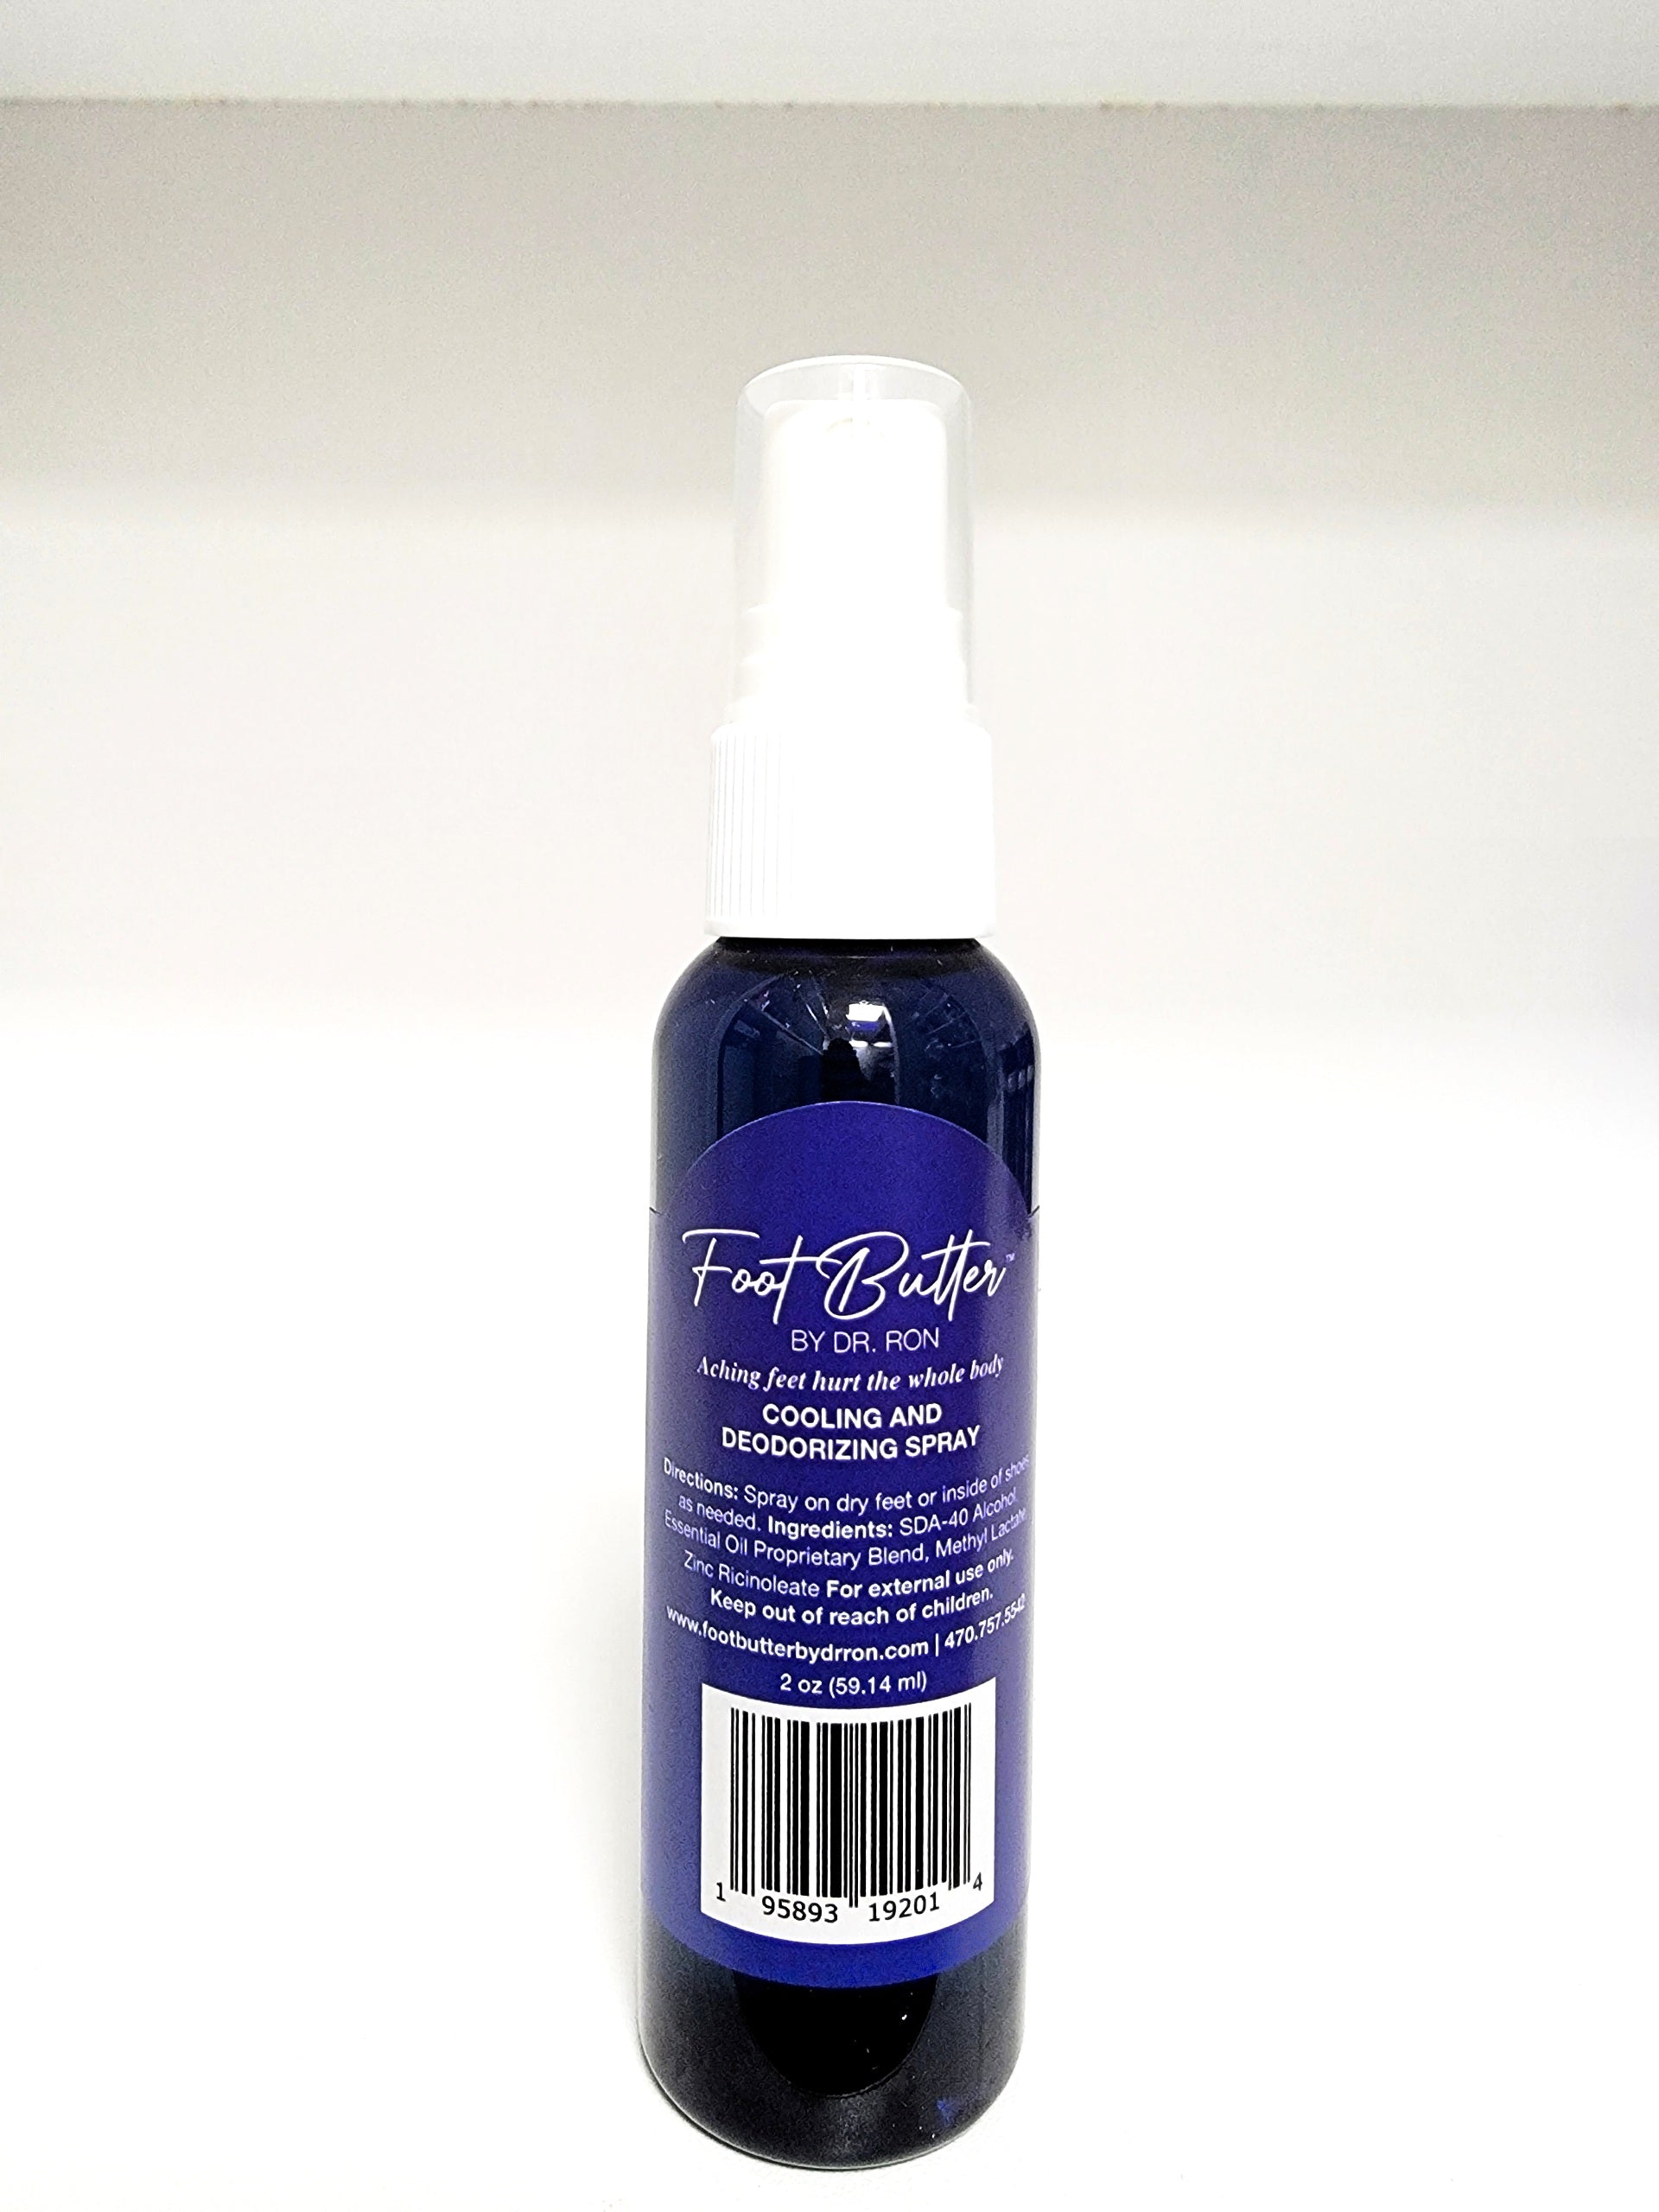 COOLING SPRAY Foot Cooling - by Deodorizing Spray Lave & Butter Dr Ron